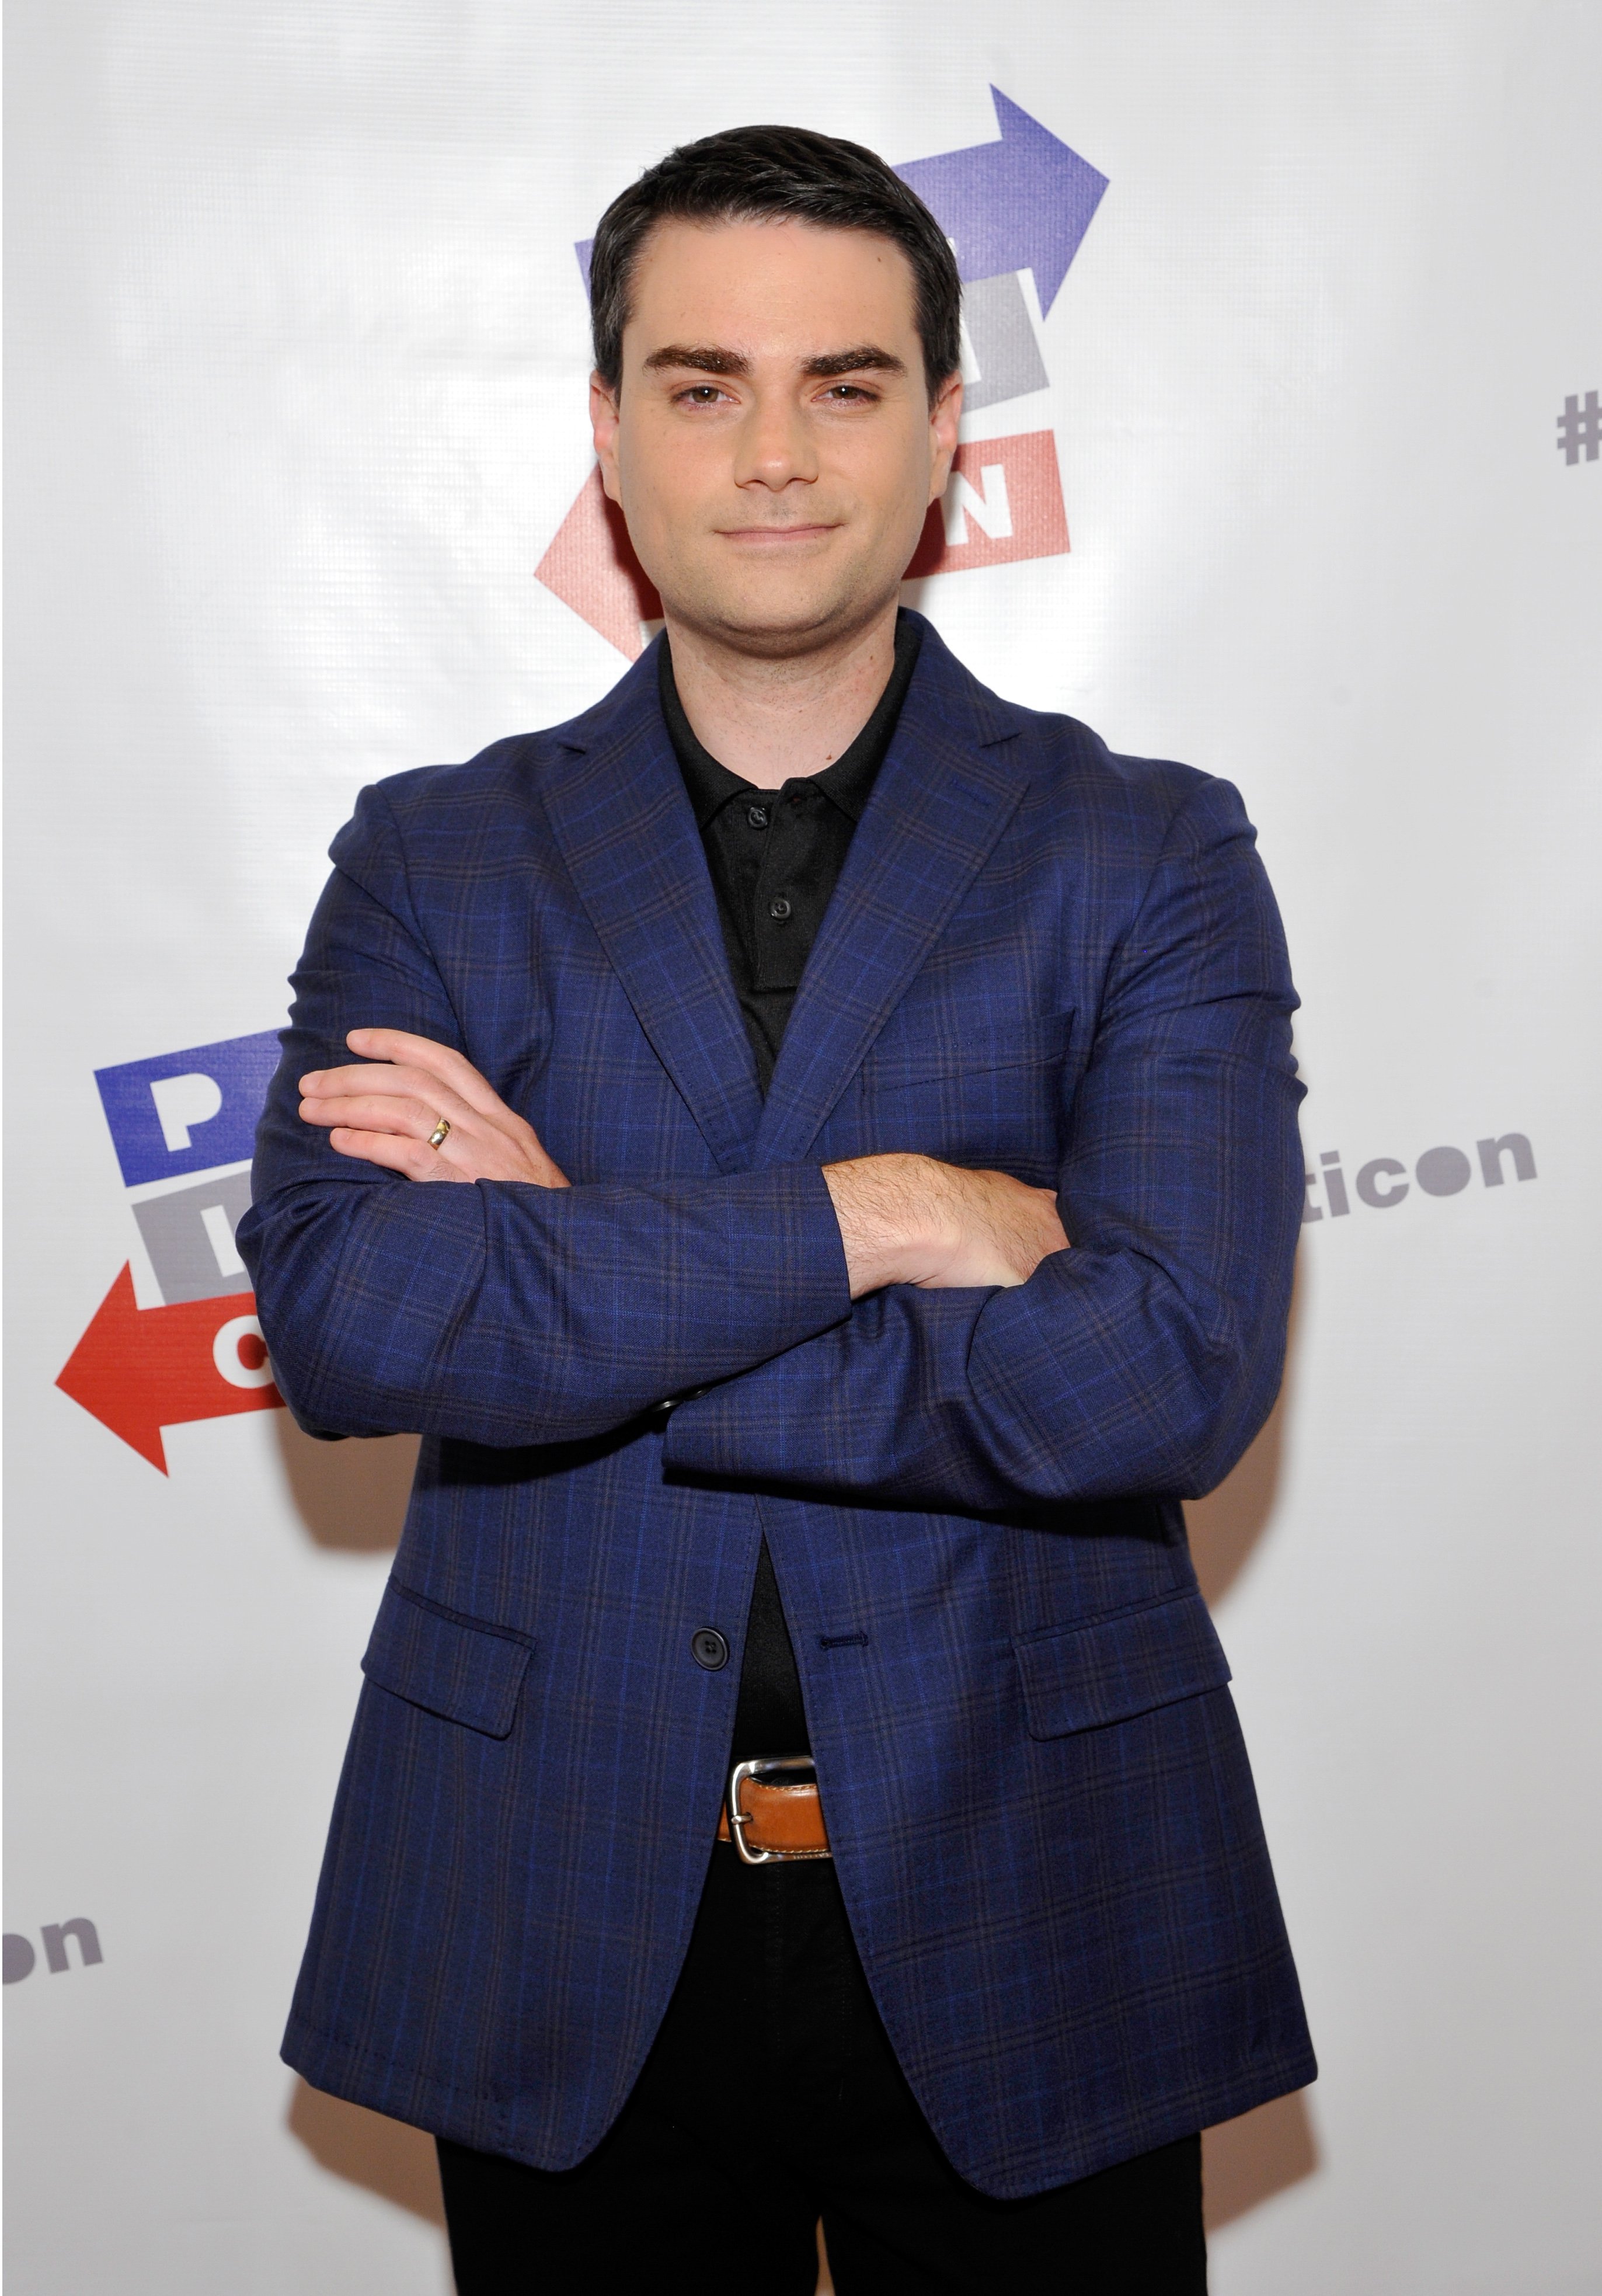 Ben Shapiro at the Politicon on July 30, 2017 | Source: Getty Images